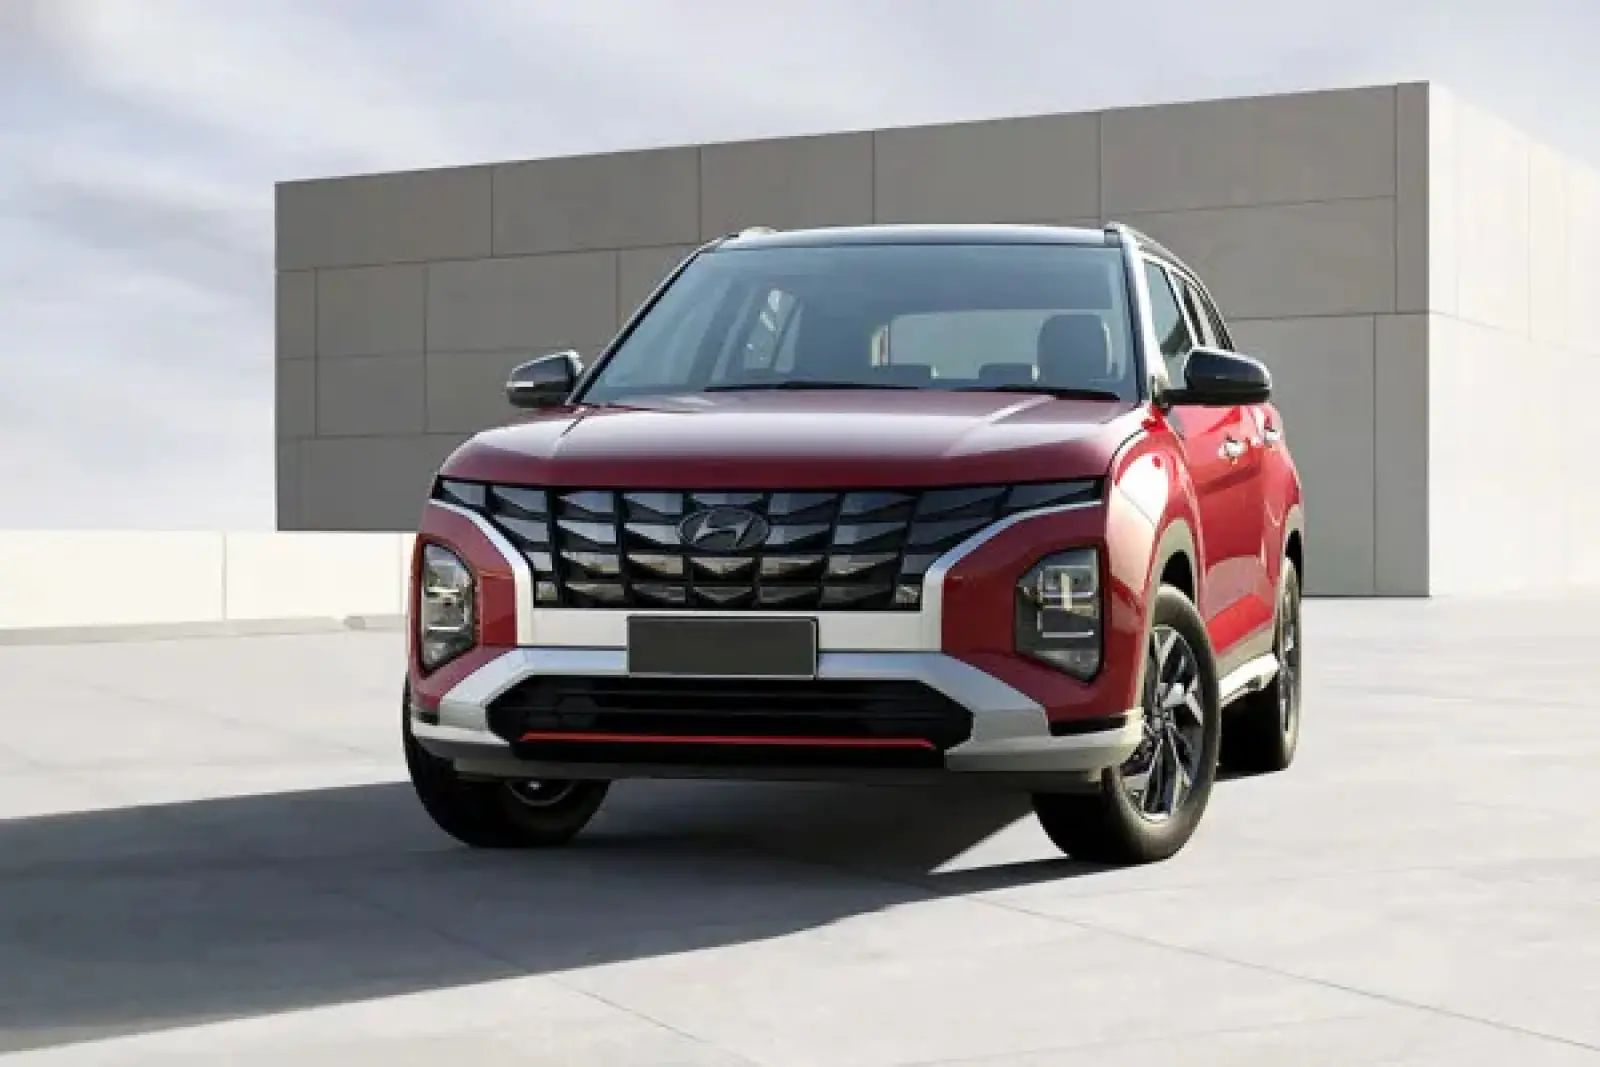 What can be special in 2024 Hyundai Creta, know the look and features of the popular SUV here